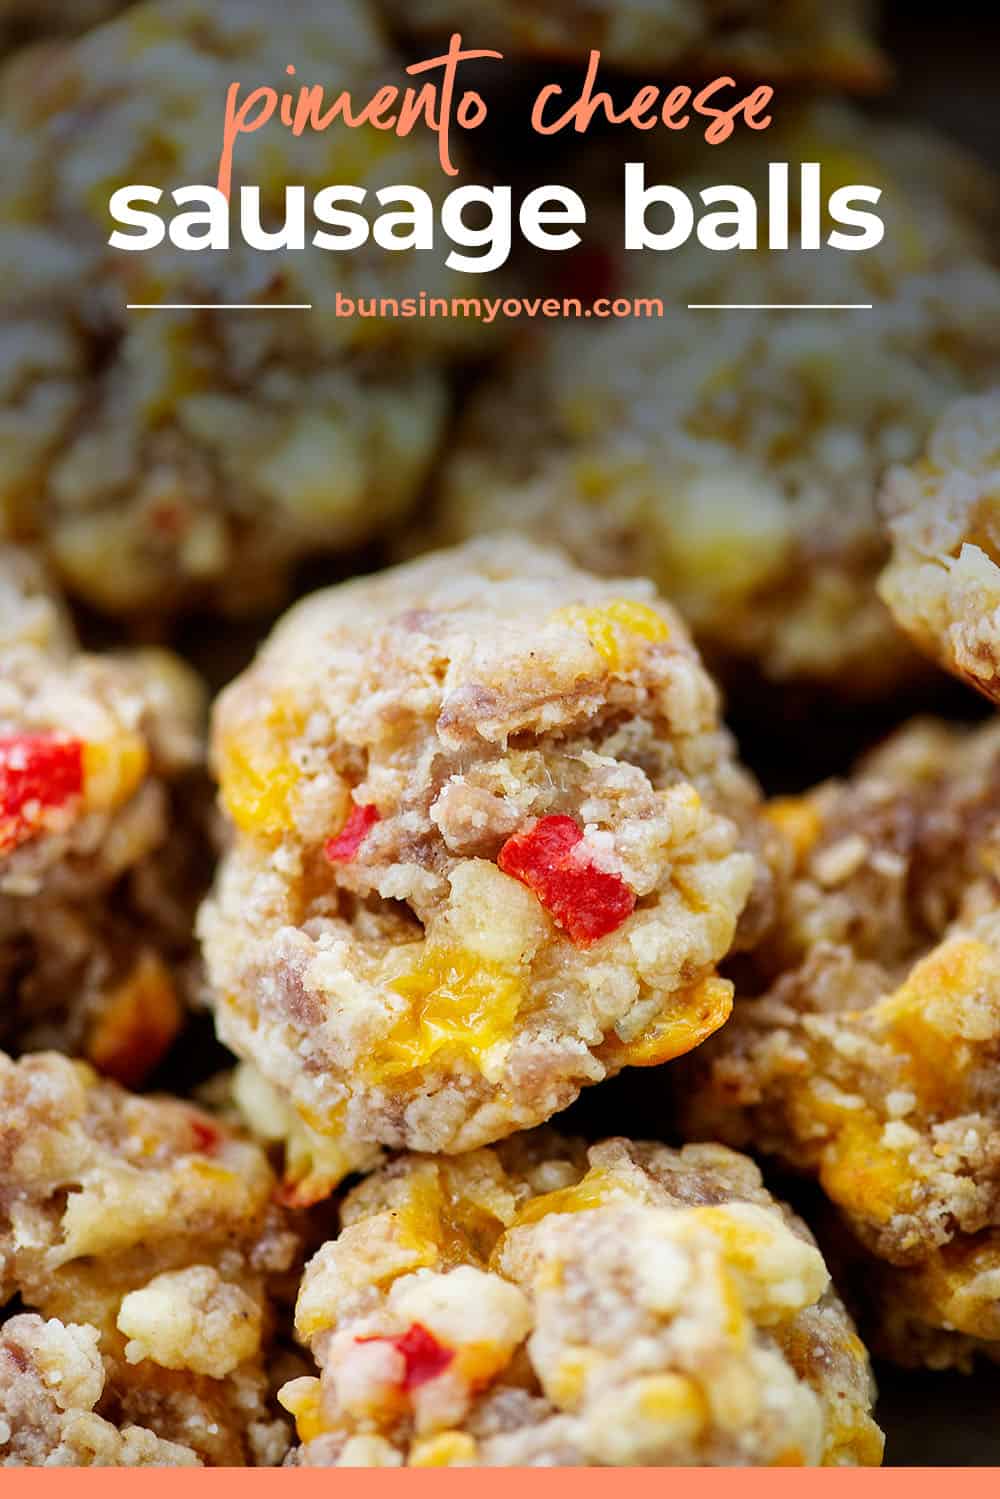 Pimento cheese sausage balls piled together with text for Pinterest.